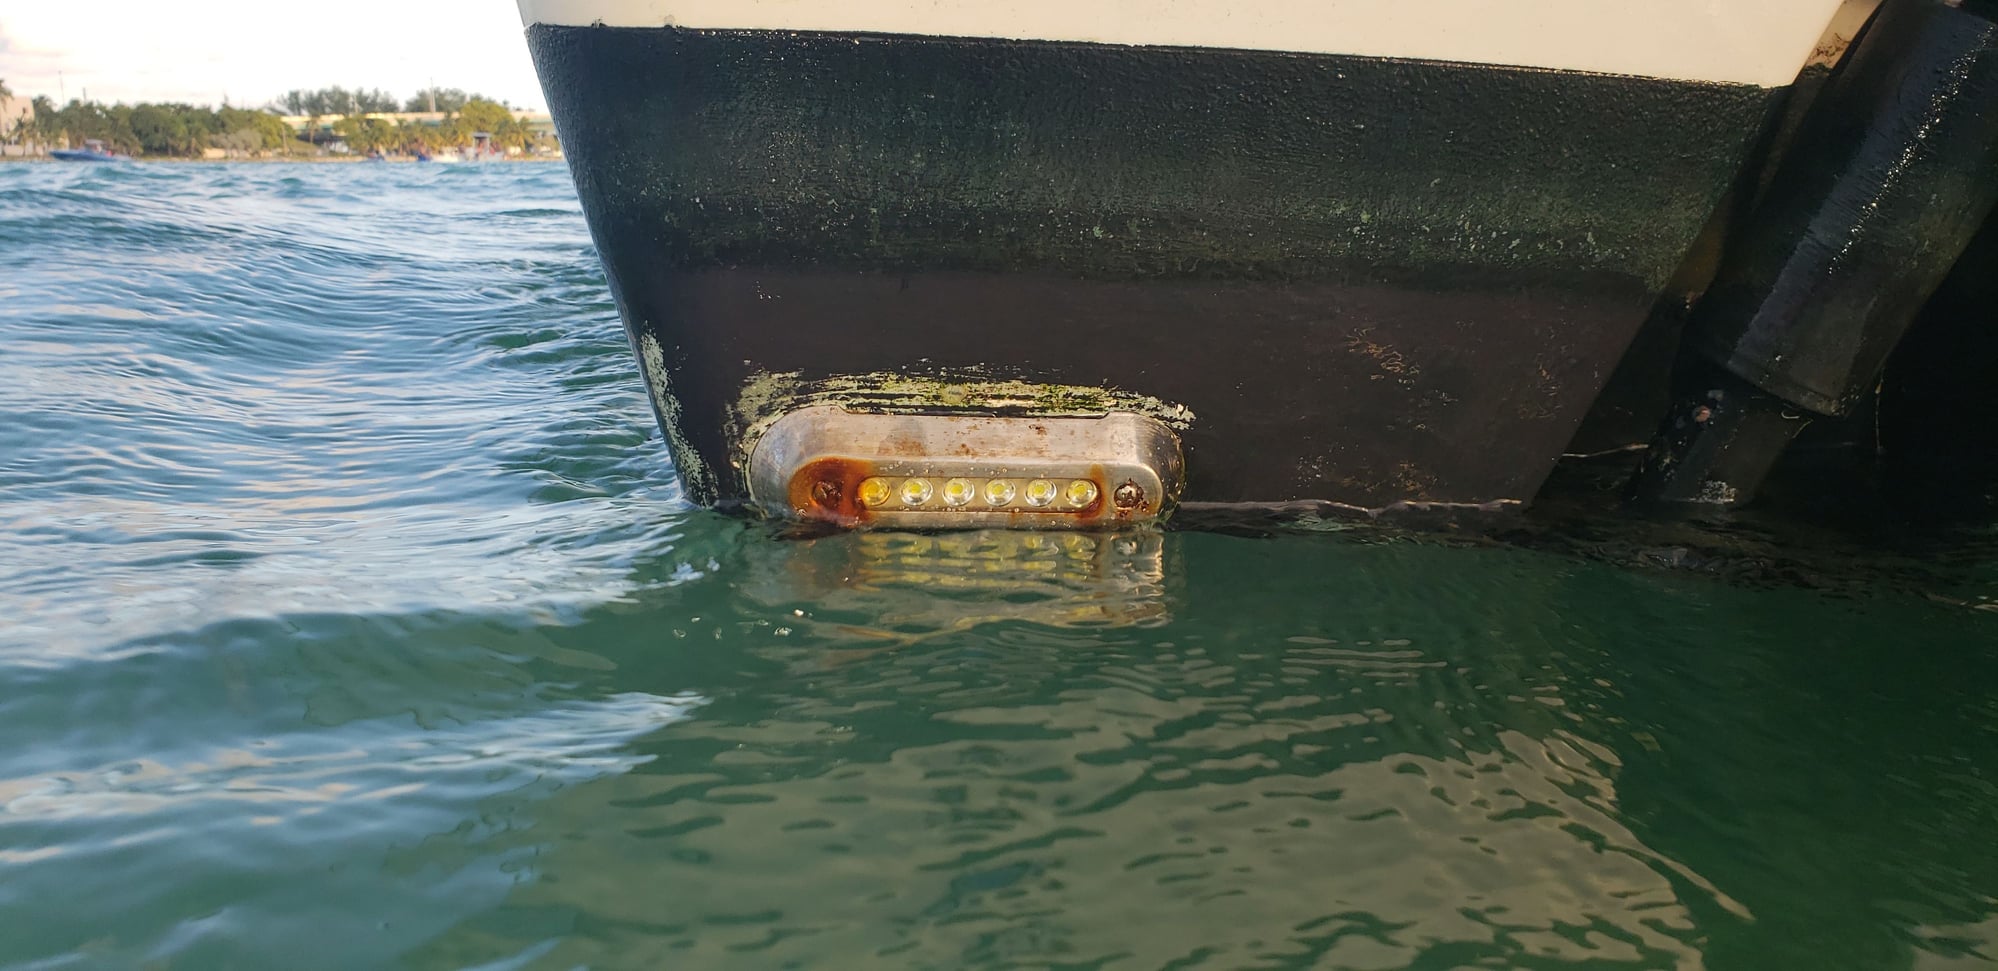 Help me identify this underwater light! - The Hull Truth - Boating